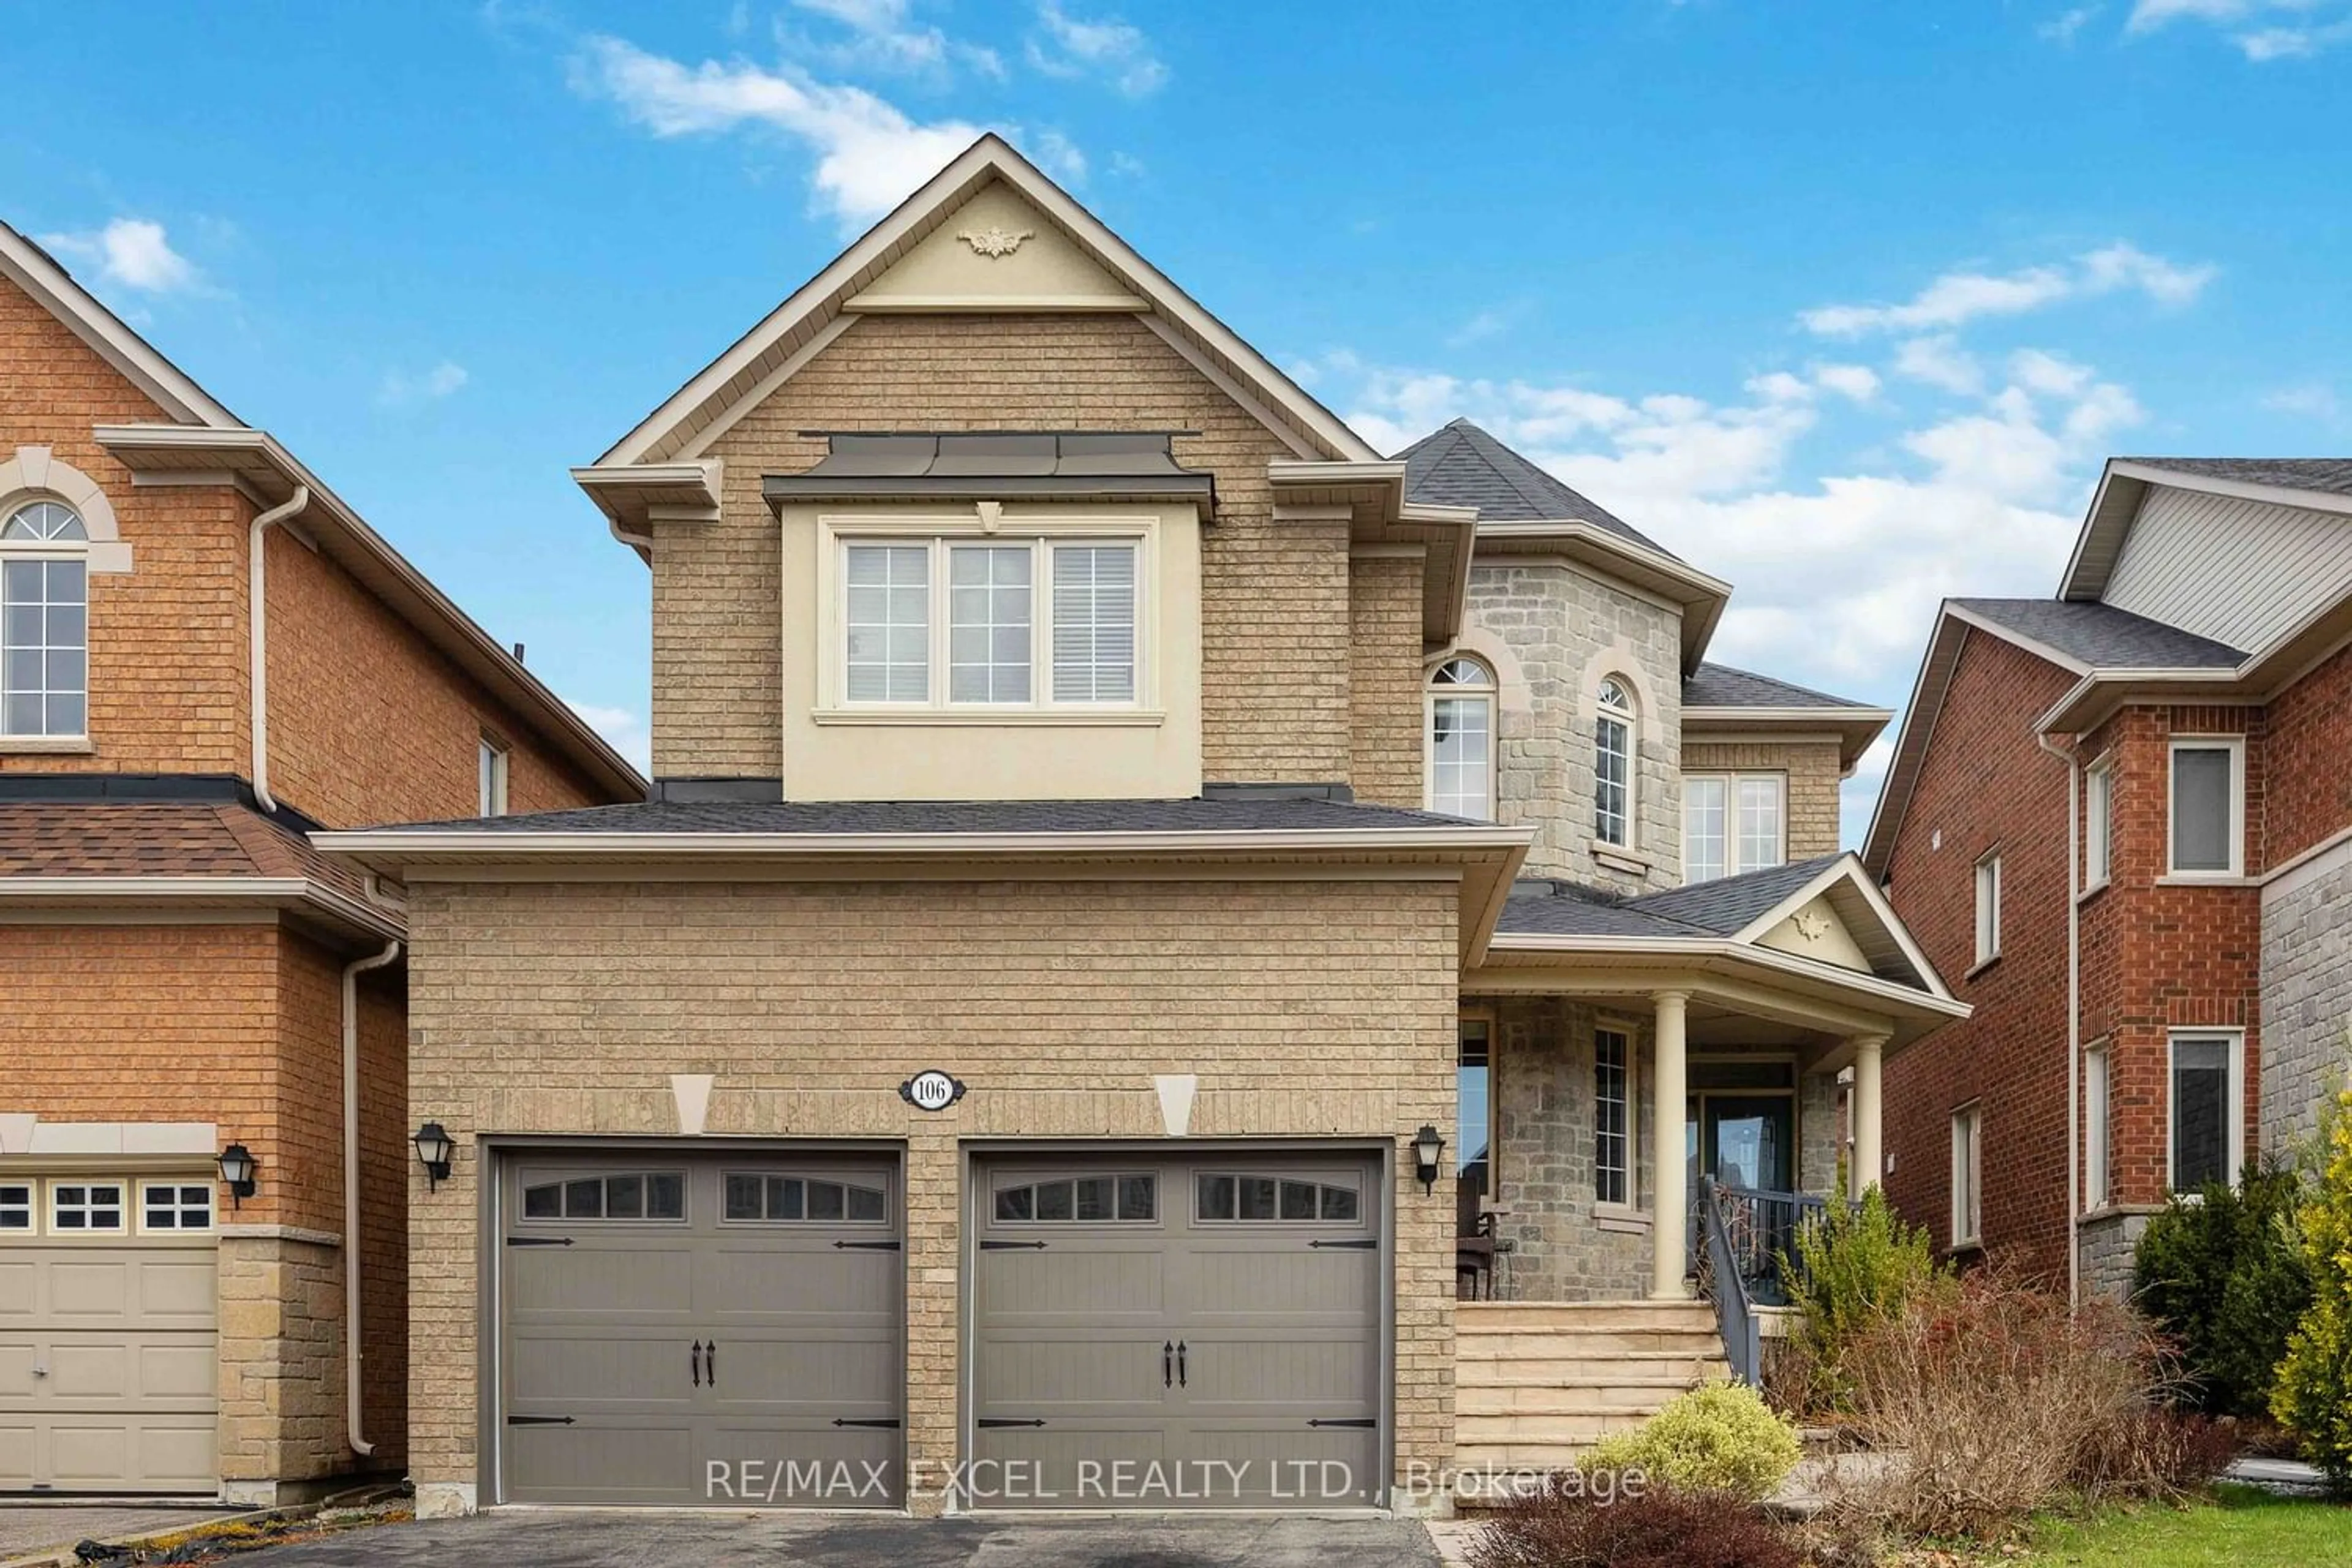 Home with brick exterior material for 106 Jefferson Forest Dr, Richmond Hill Ontario L4E 4J8